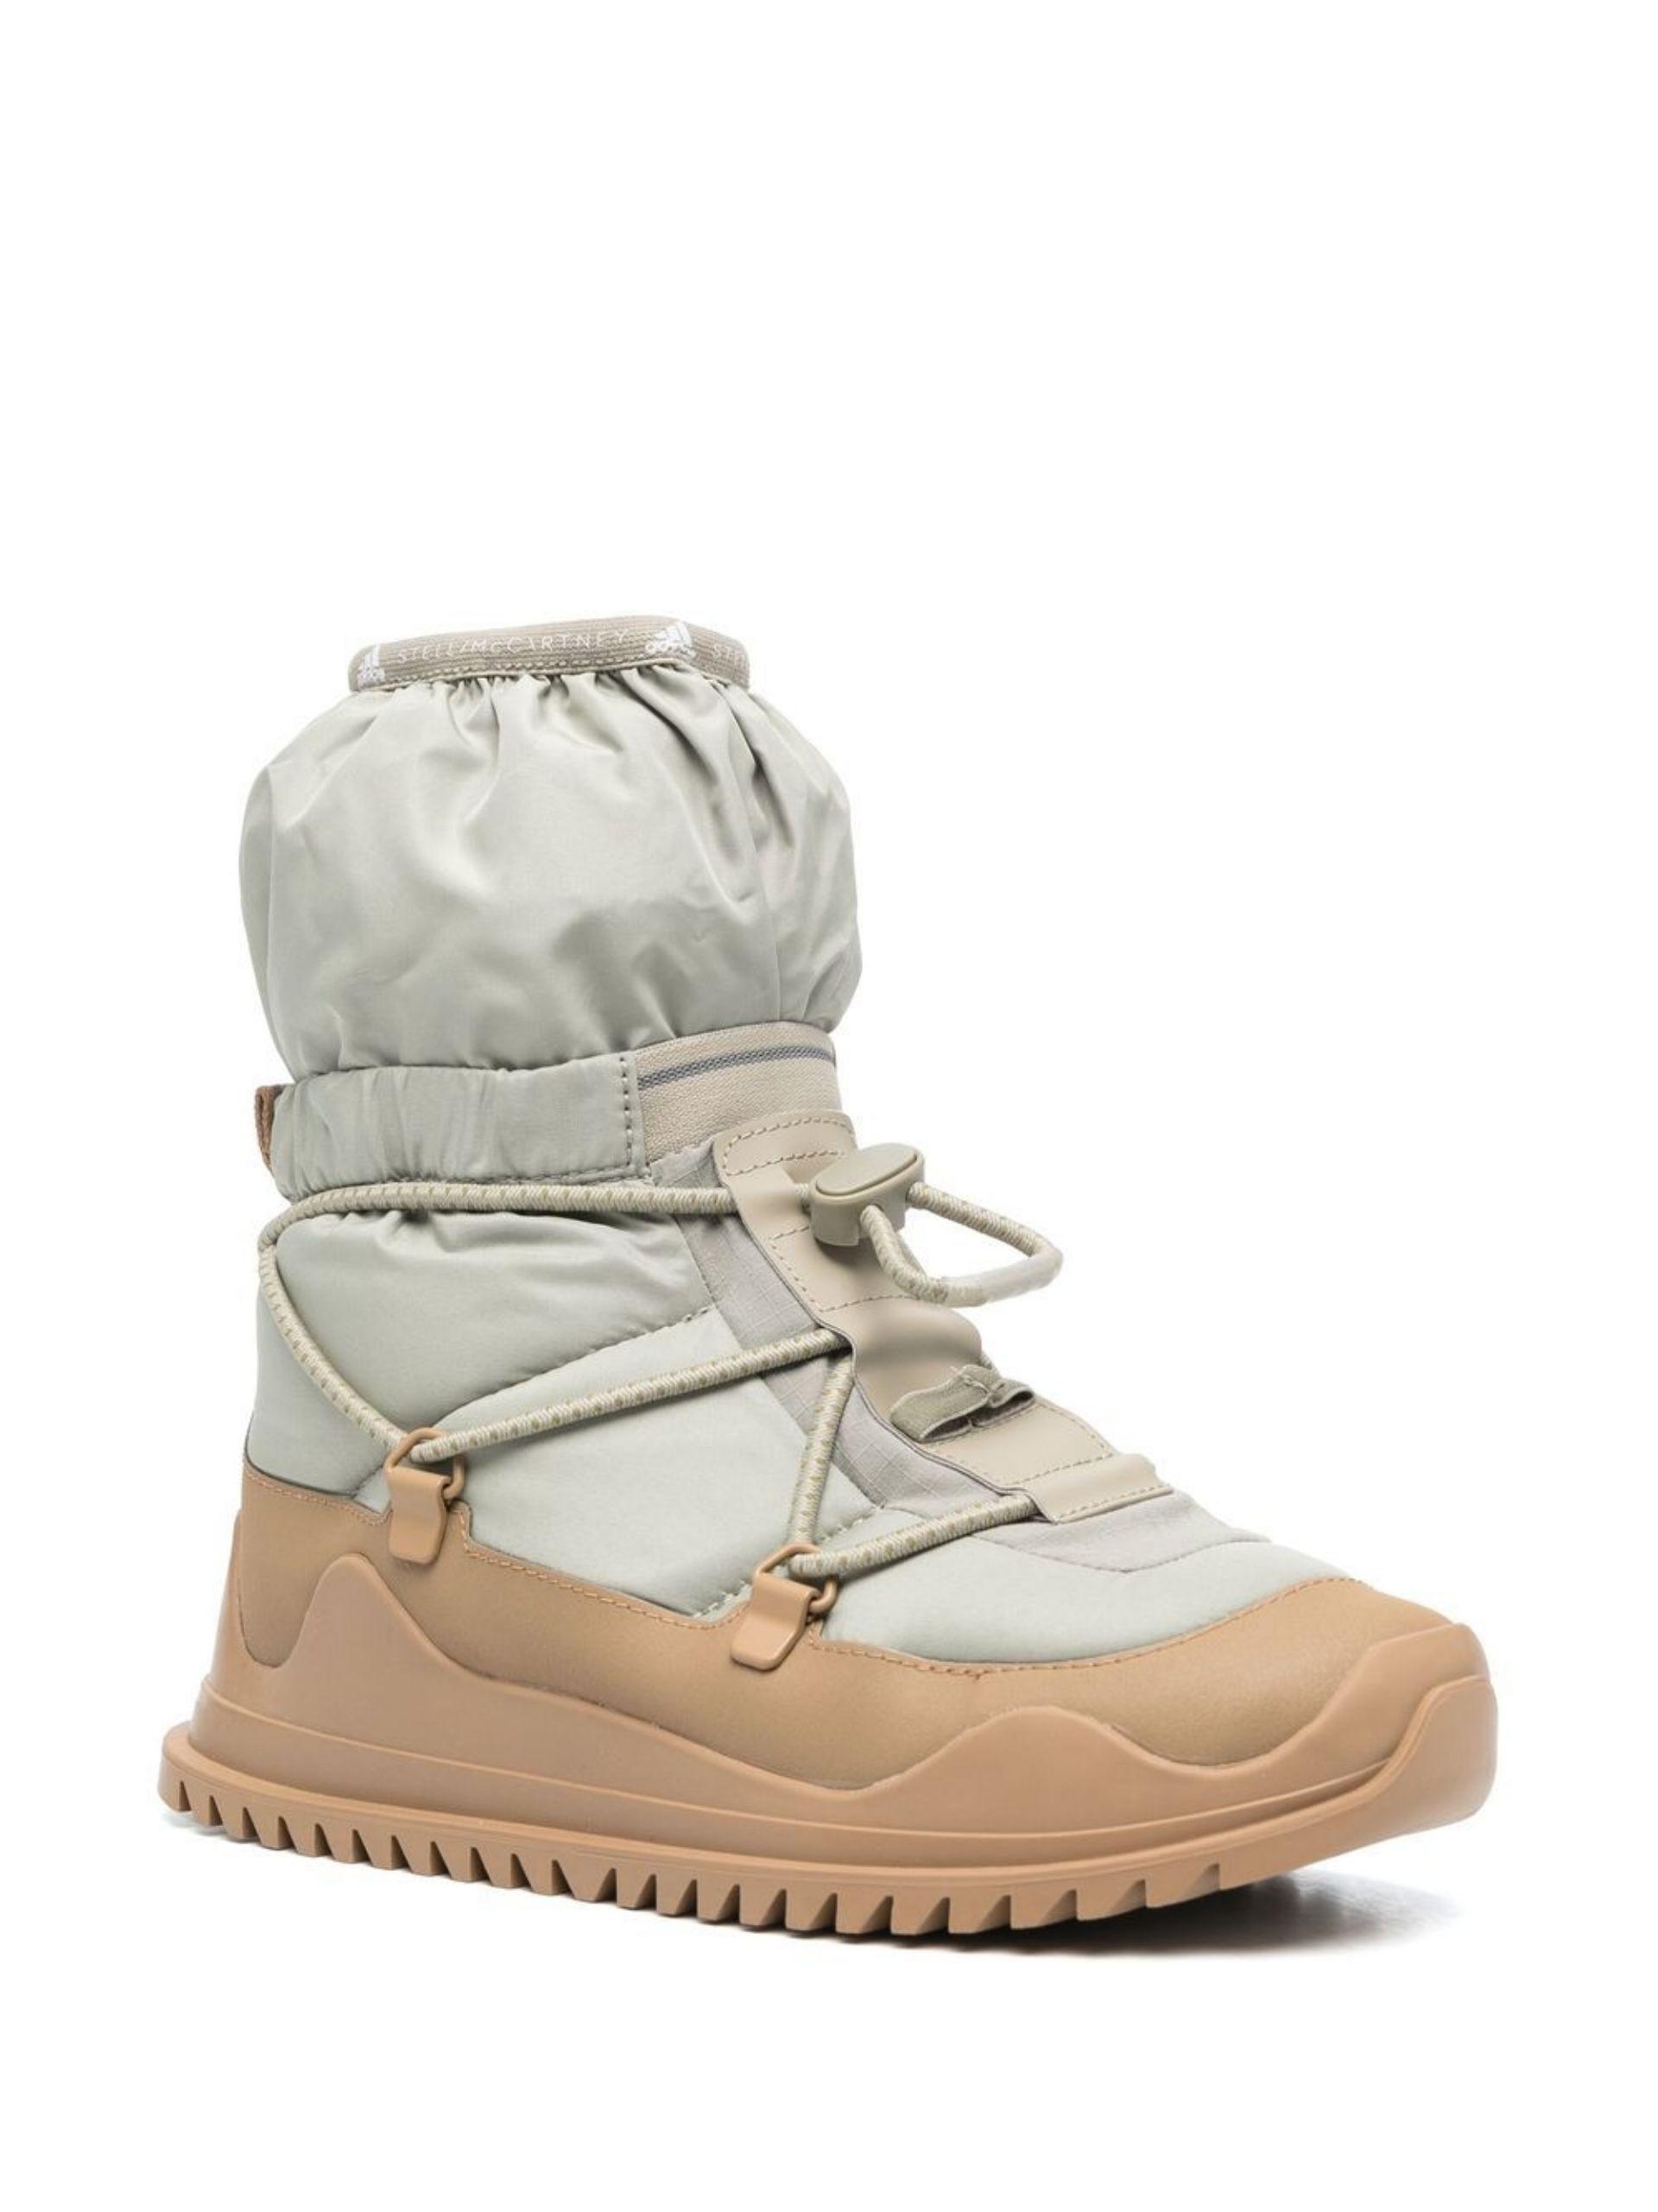 adidas By Stella McCartney Stivaletto Chunky Boots - Women's -  Rubber/fabric in Natural | Lyst